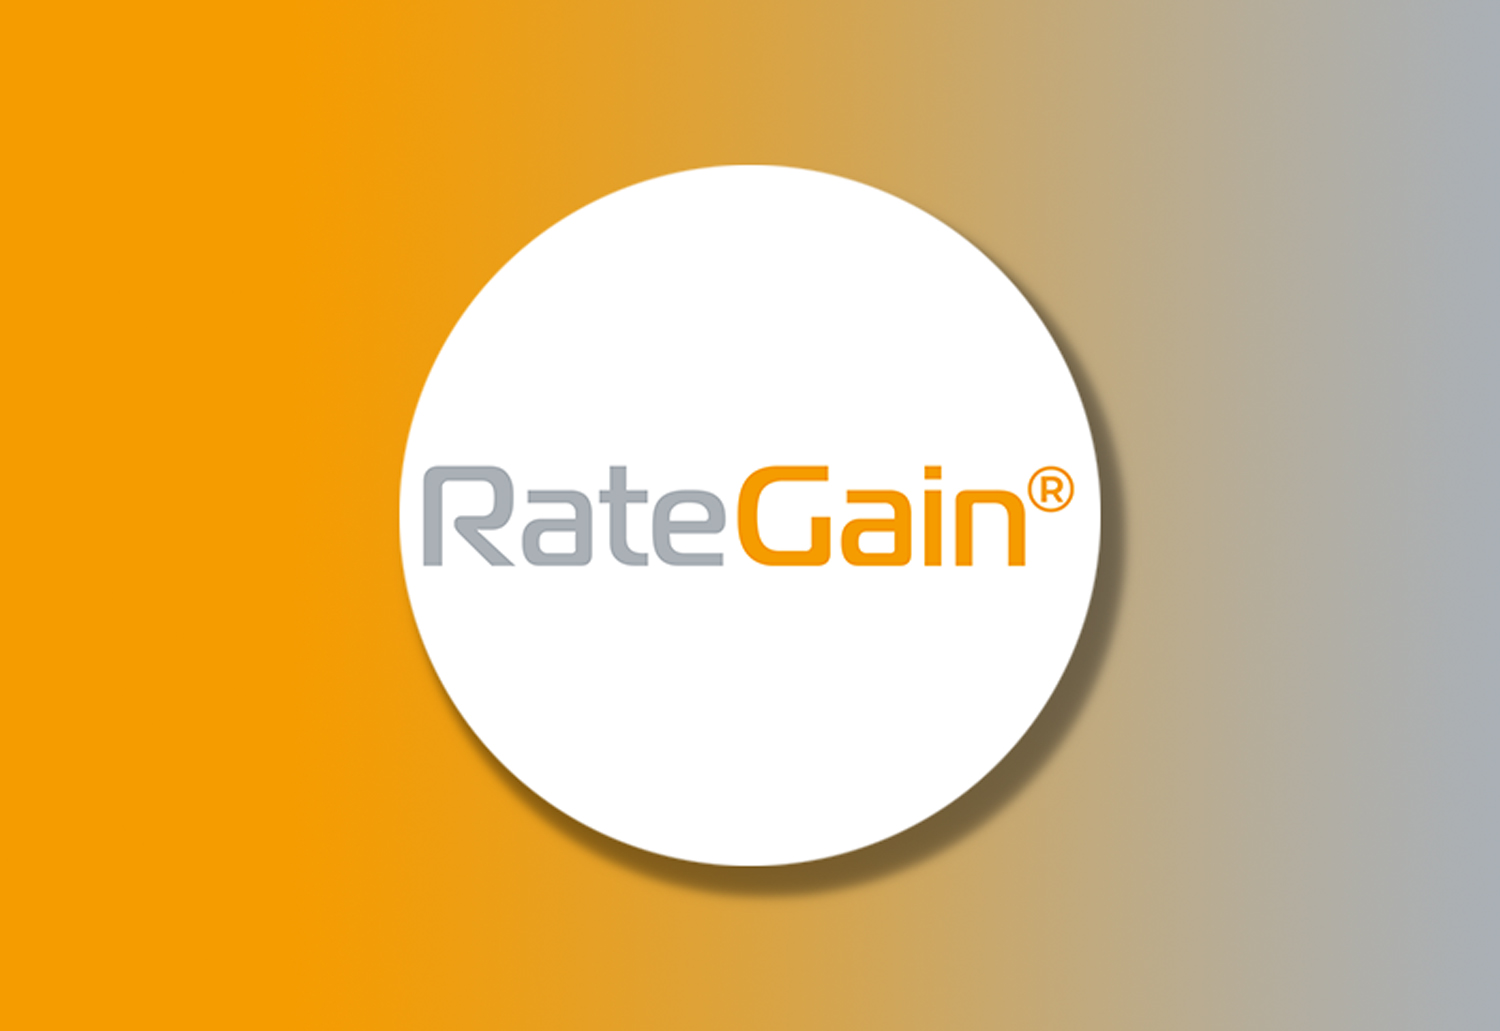 RateGain’s PULSE powered by Adara suggests huge growth for India and Asia during the Chinese New Year